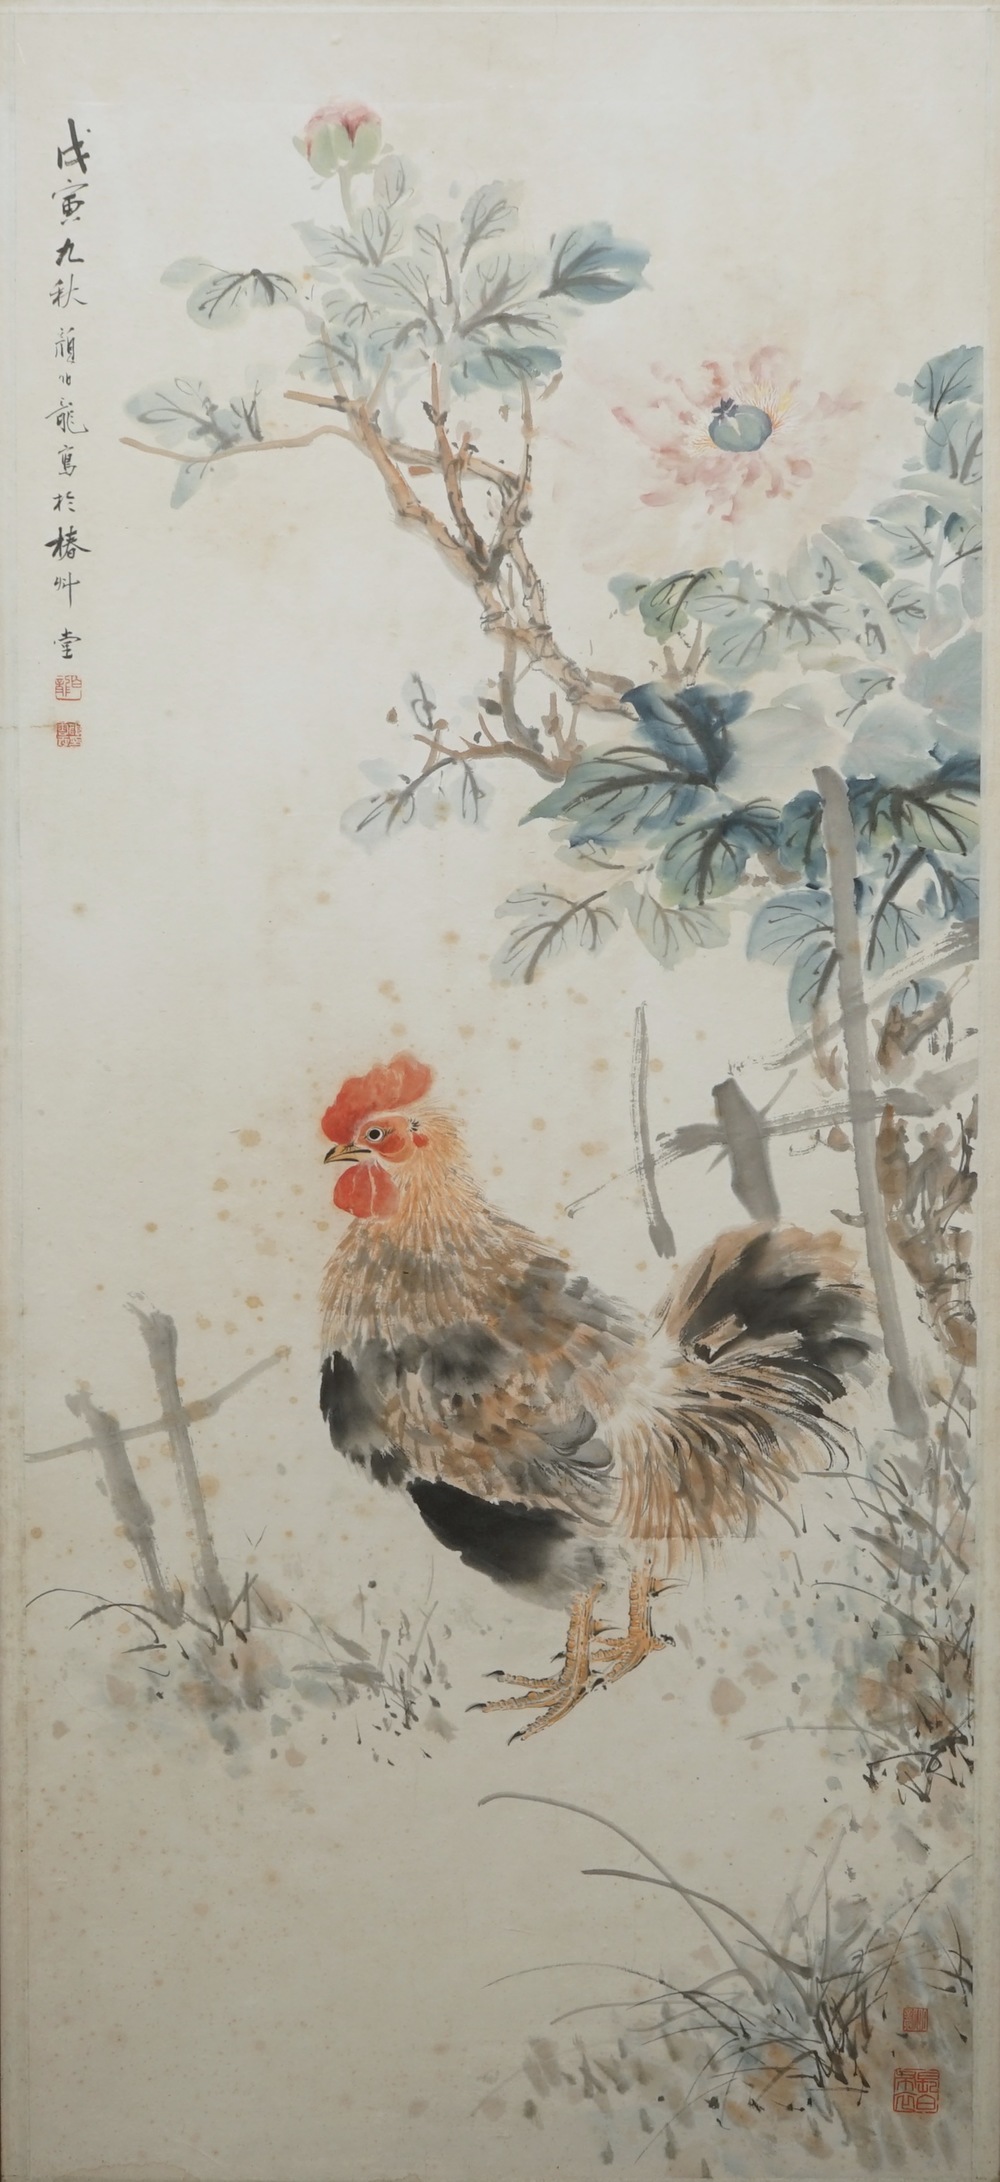 Yan Bolong (1898 -1954), A rooster in a flowery garden, watercolour on paper